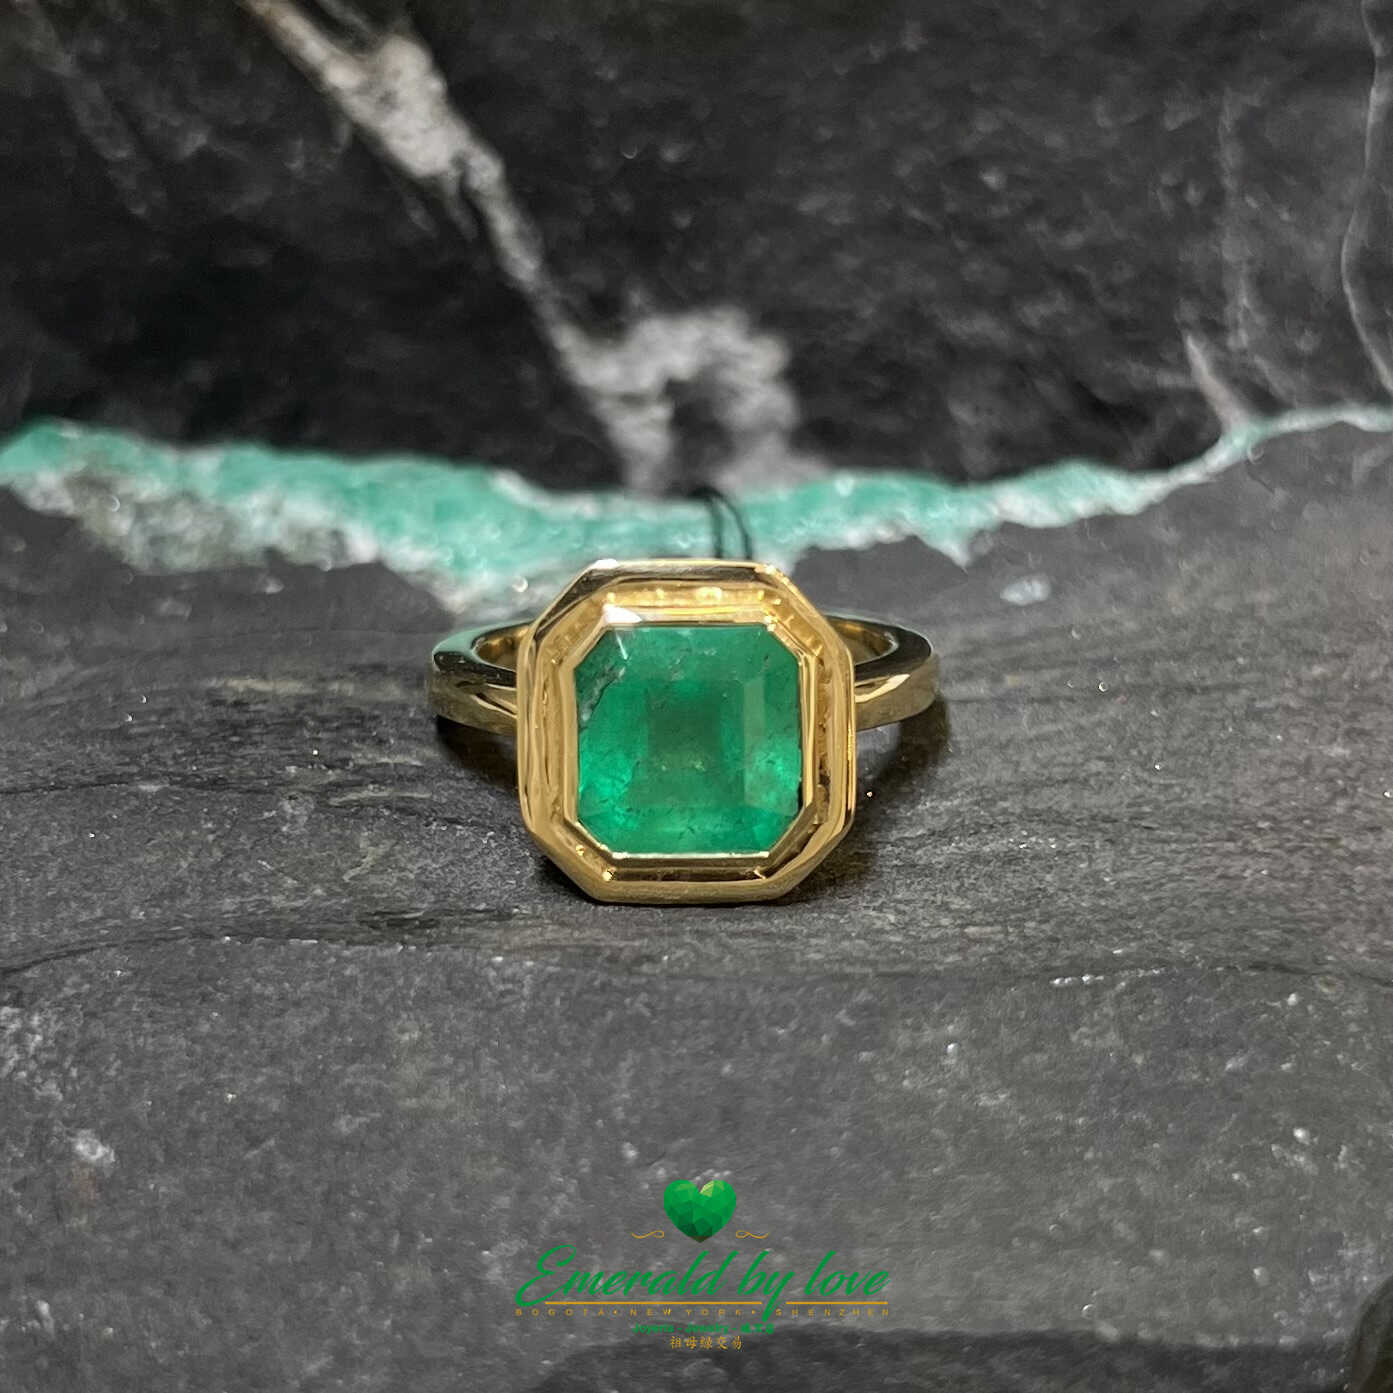 Bold Yellow Gold Ring with Square-Cut Emerald in Bezel Setting